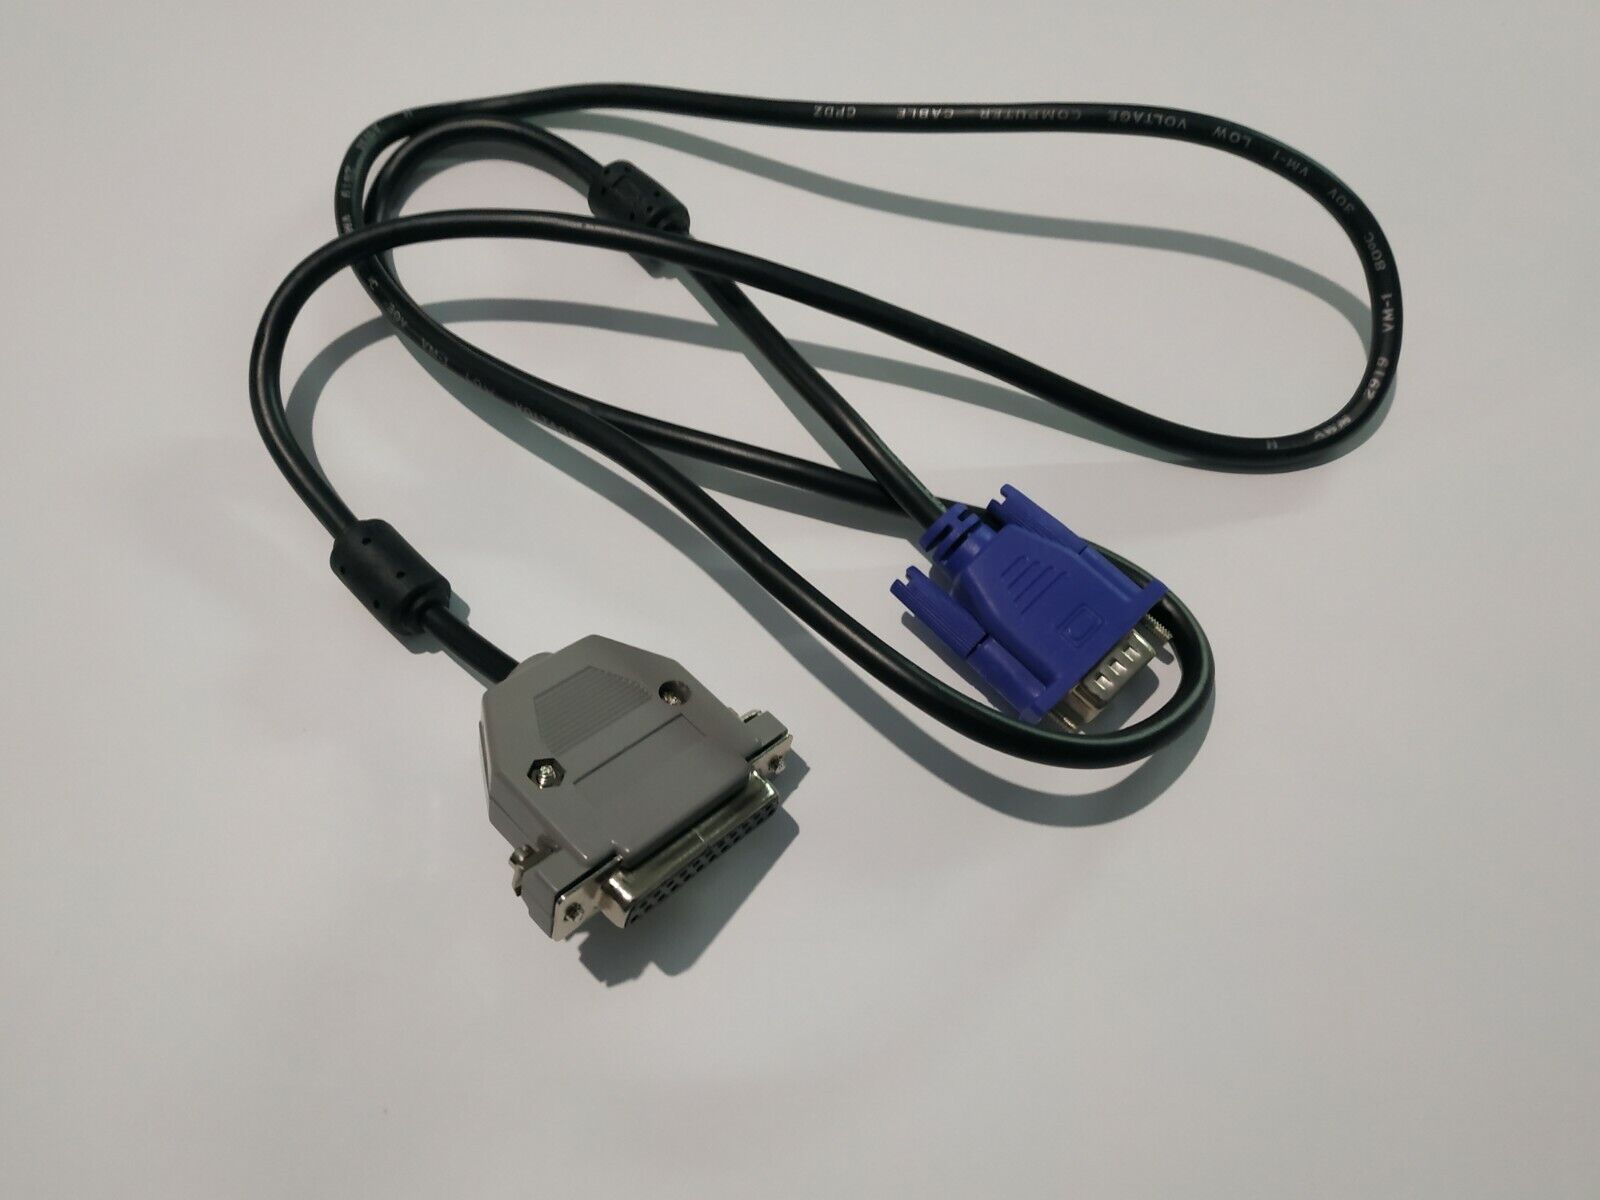 Amiga A500,A600, A1200, DB23 to VGA cable for monitor or scaler OSSC or gbs 8200